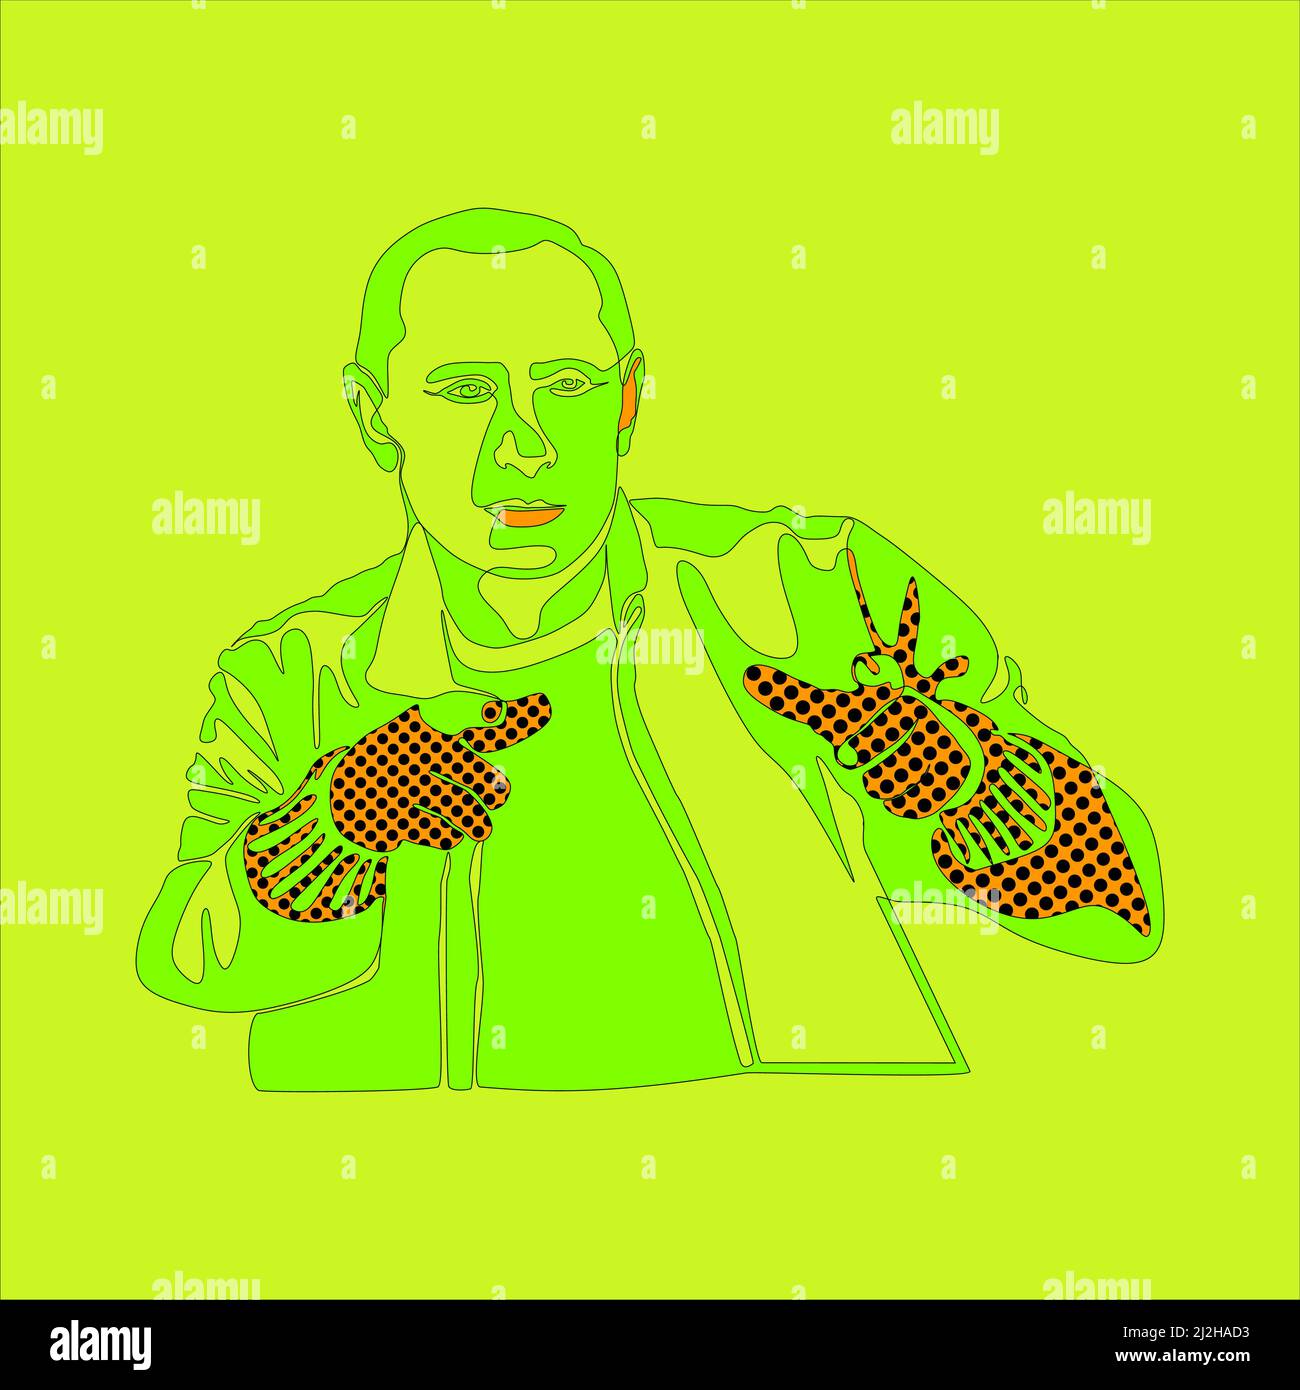 Poster with a portrait of Russian President. Vladimir Putin with fingers folded like a gun on the green background colors pop art style vector illustr Stock Vector